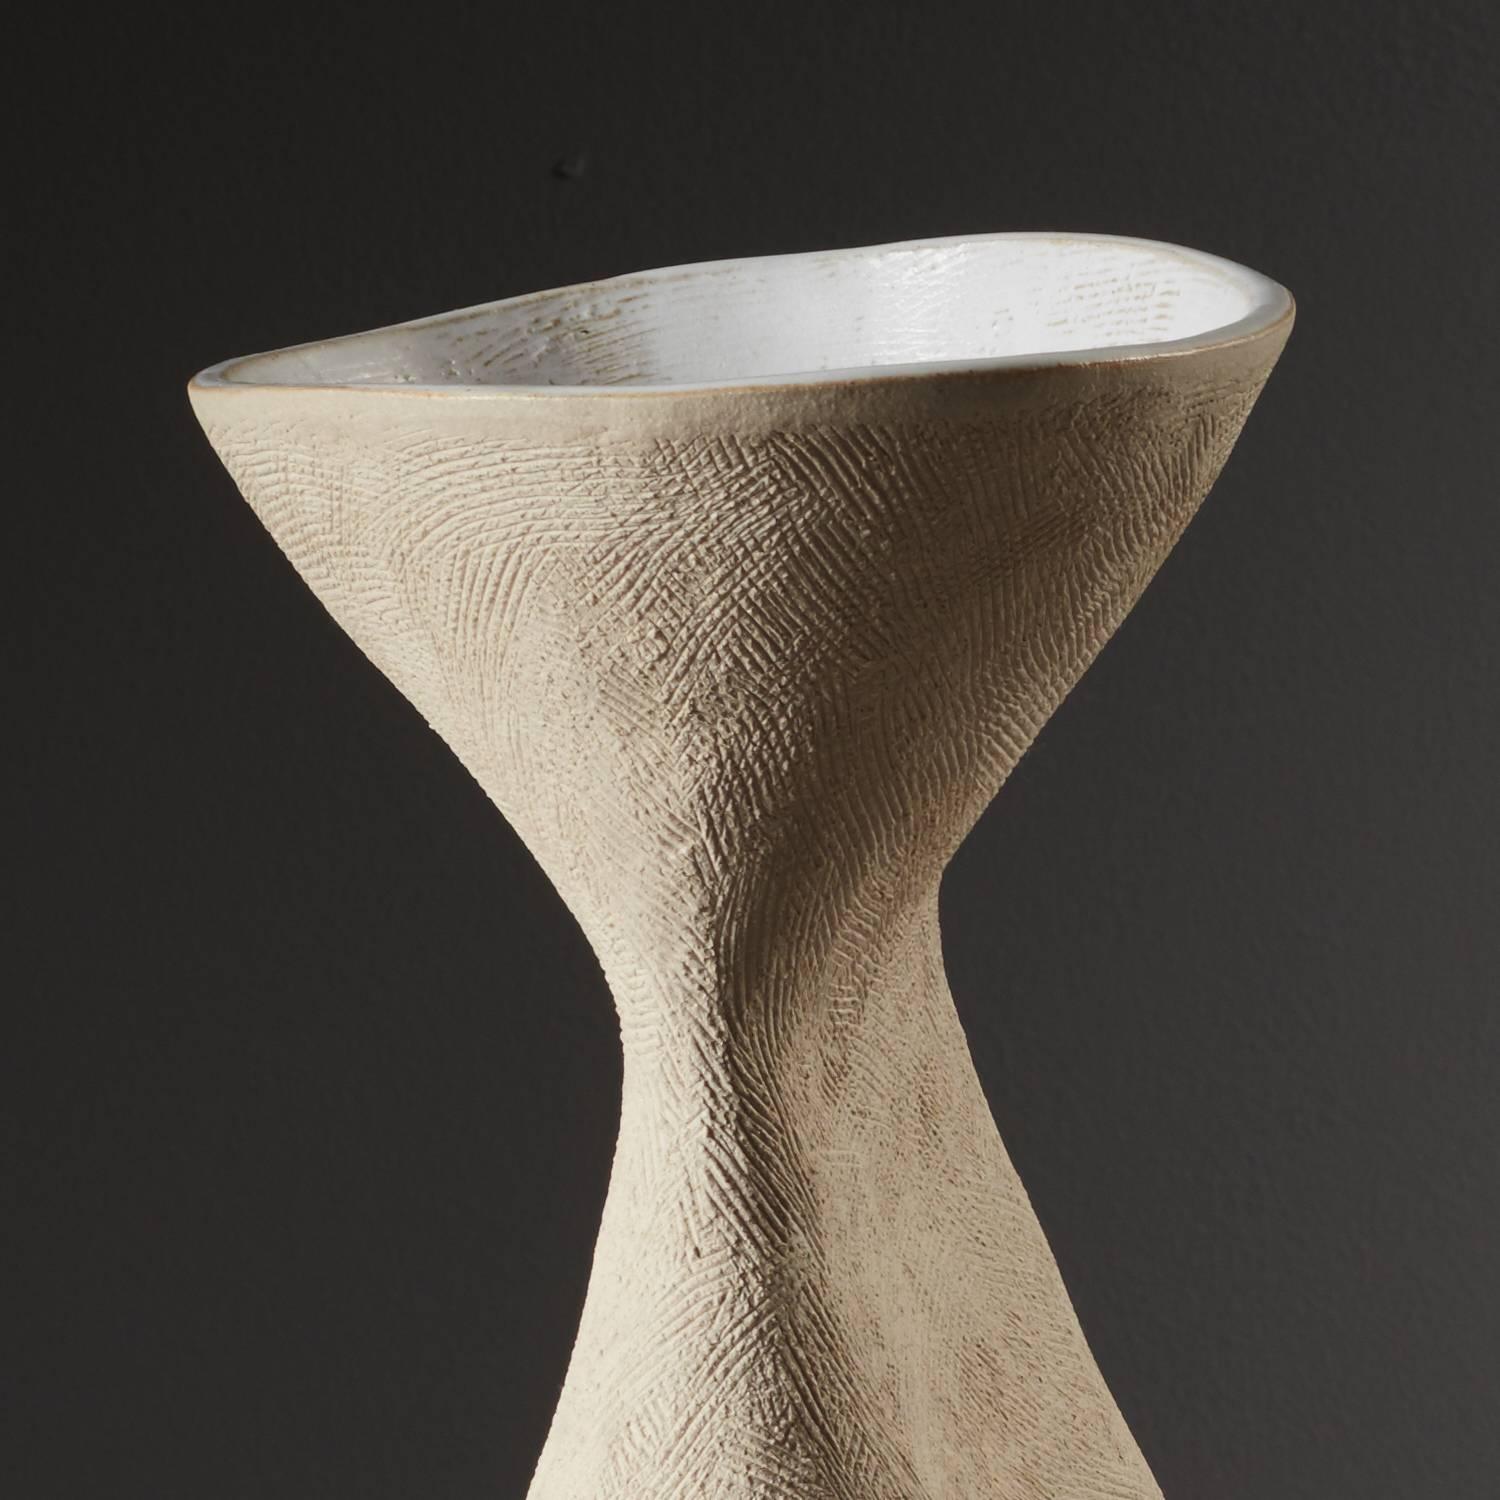 Winter Queen Vessel' by ceramicist Iva Polachova, is an elegant tactile form, with a unique character. Coiled and crafted with simple scraping tools. This vessel has been crafted to convey the “stillness and majesty of Winter”. Focused on teasing